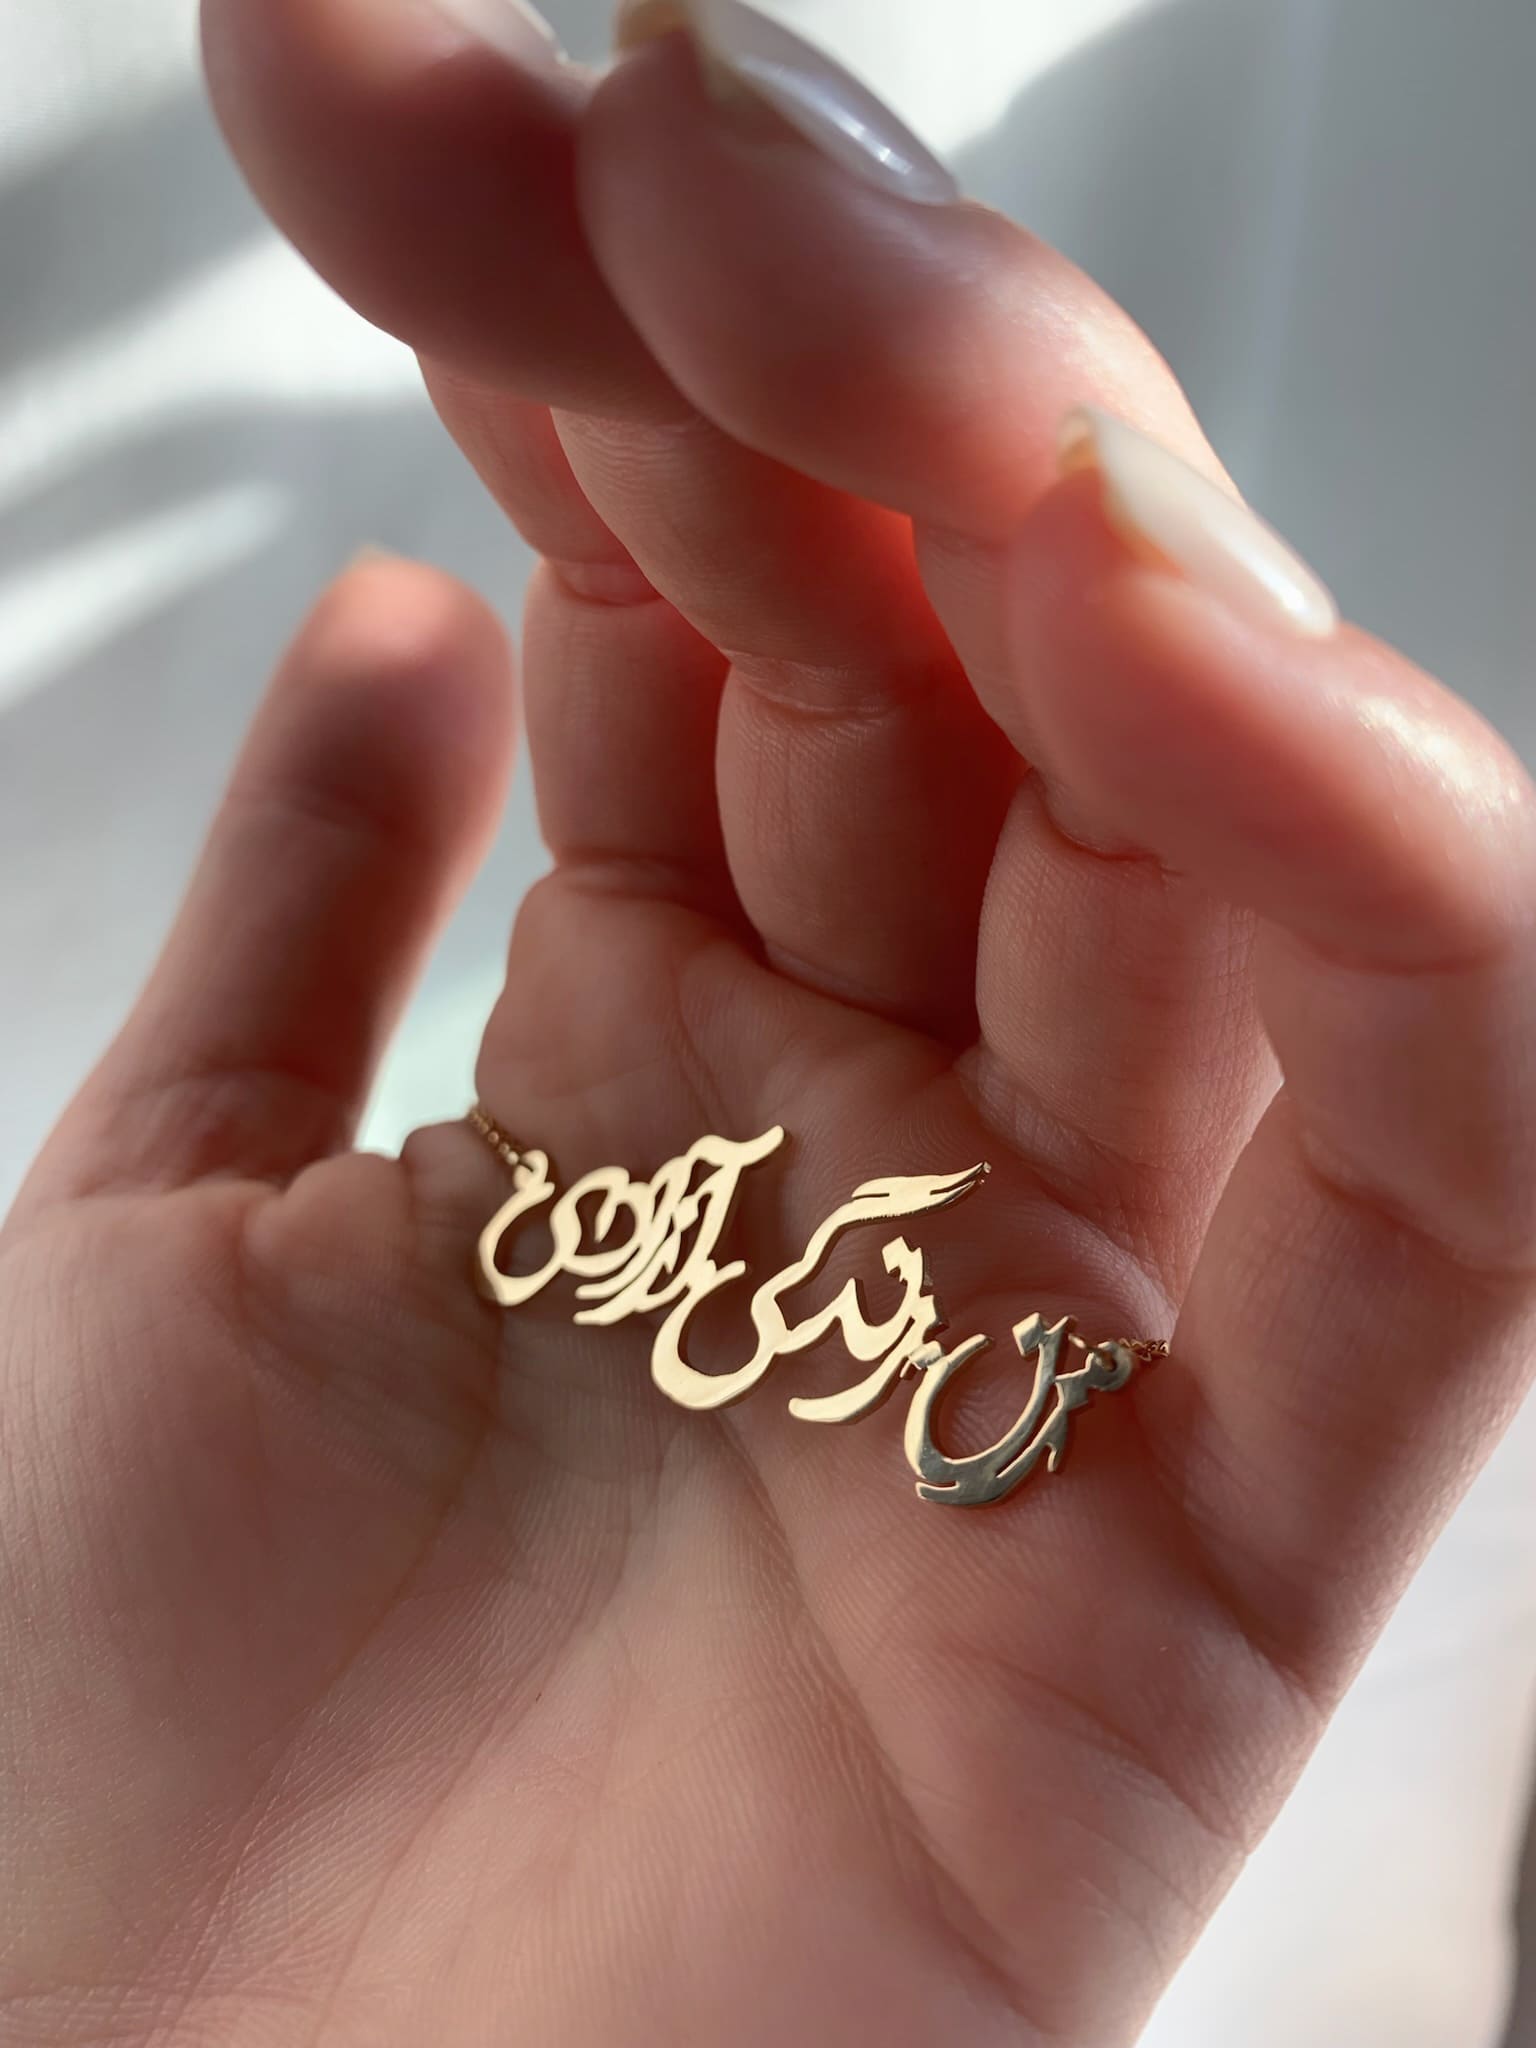 Women Life Freedom Iran Calligraphy Name Necklace